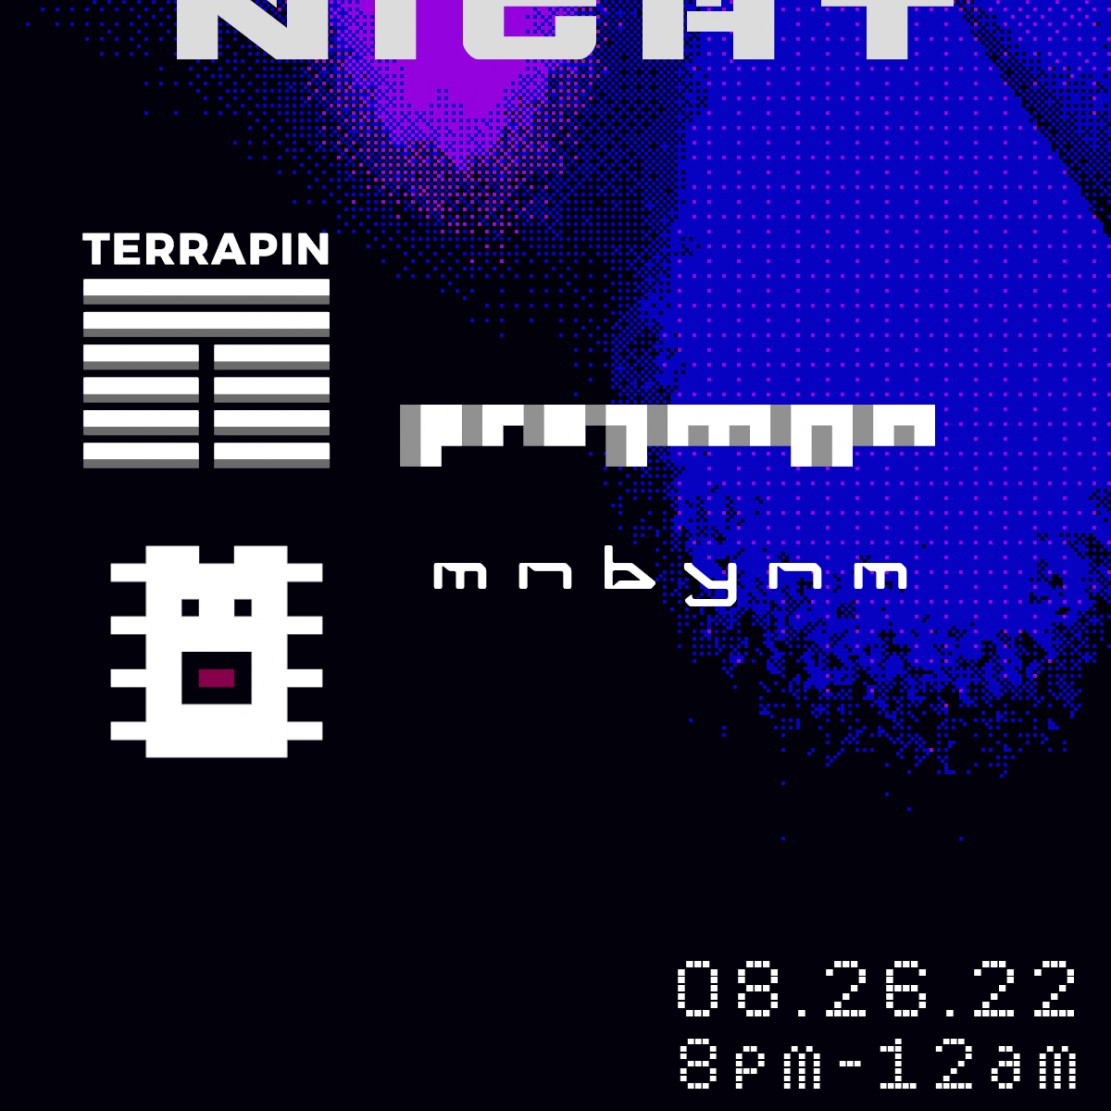 SYNTH NIGHT Live in St. Pete, FL Friday 8.26: My first show in a long time! w/ Terrapin, Protman, Uhlectronic, mnbynm